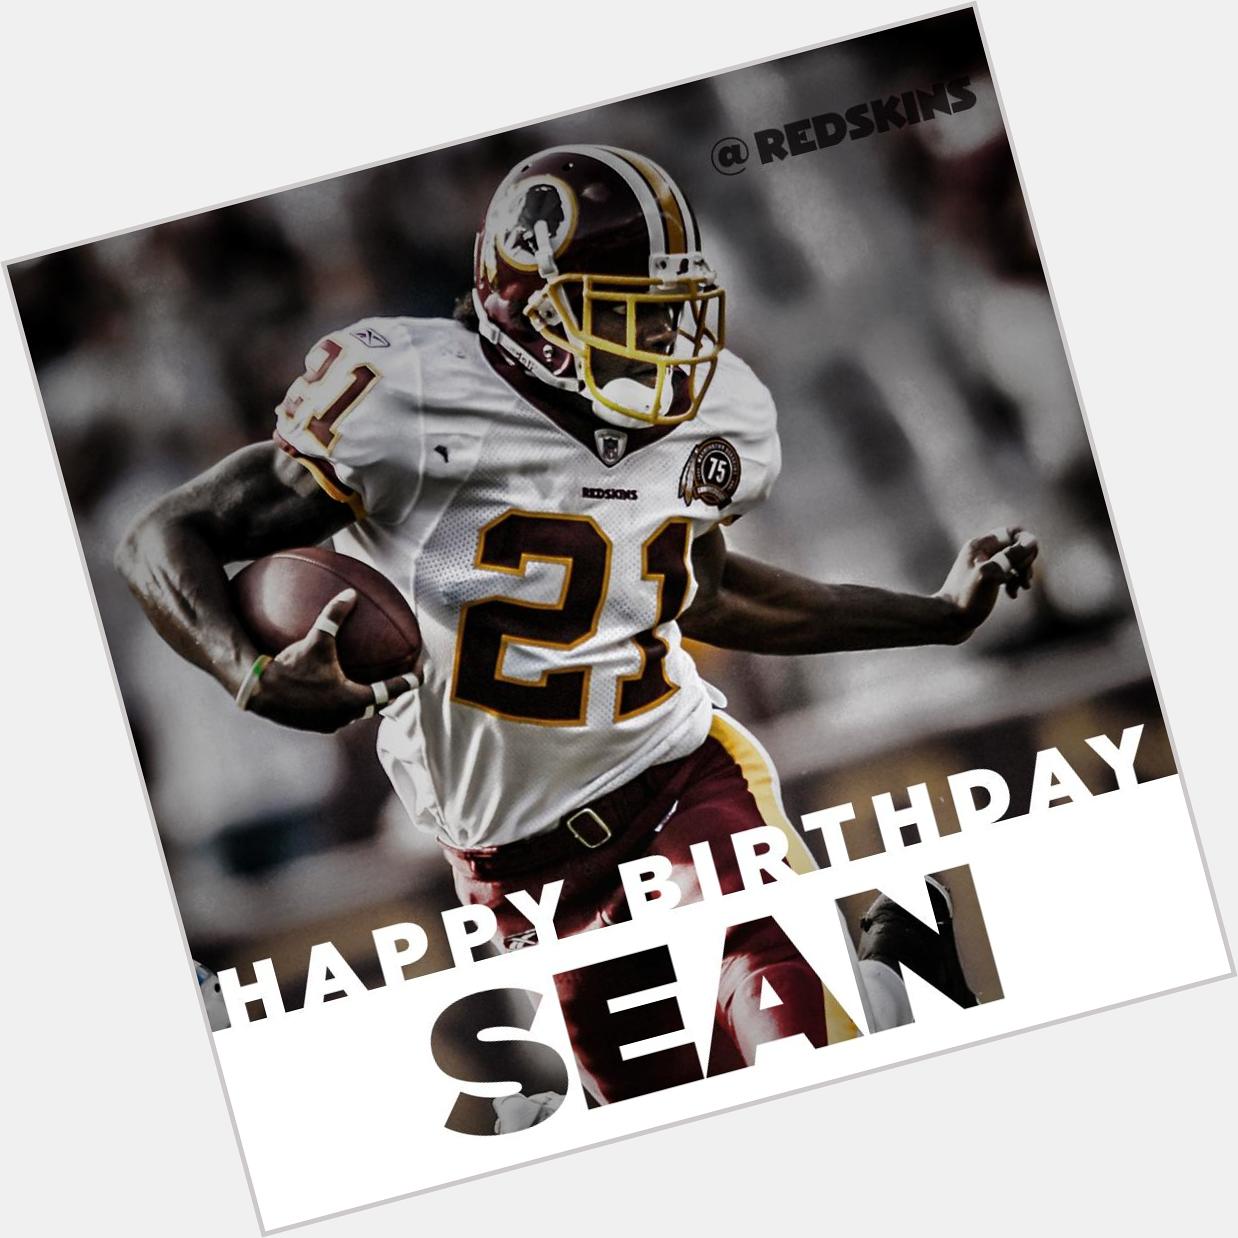 Happy birthday to Sean Taylor, who would have turned 32 today. You are greatly missed. 